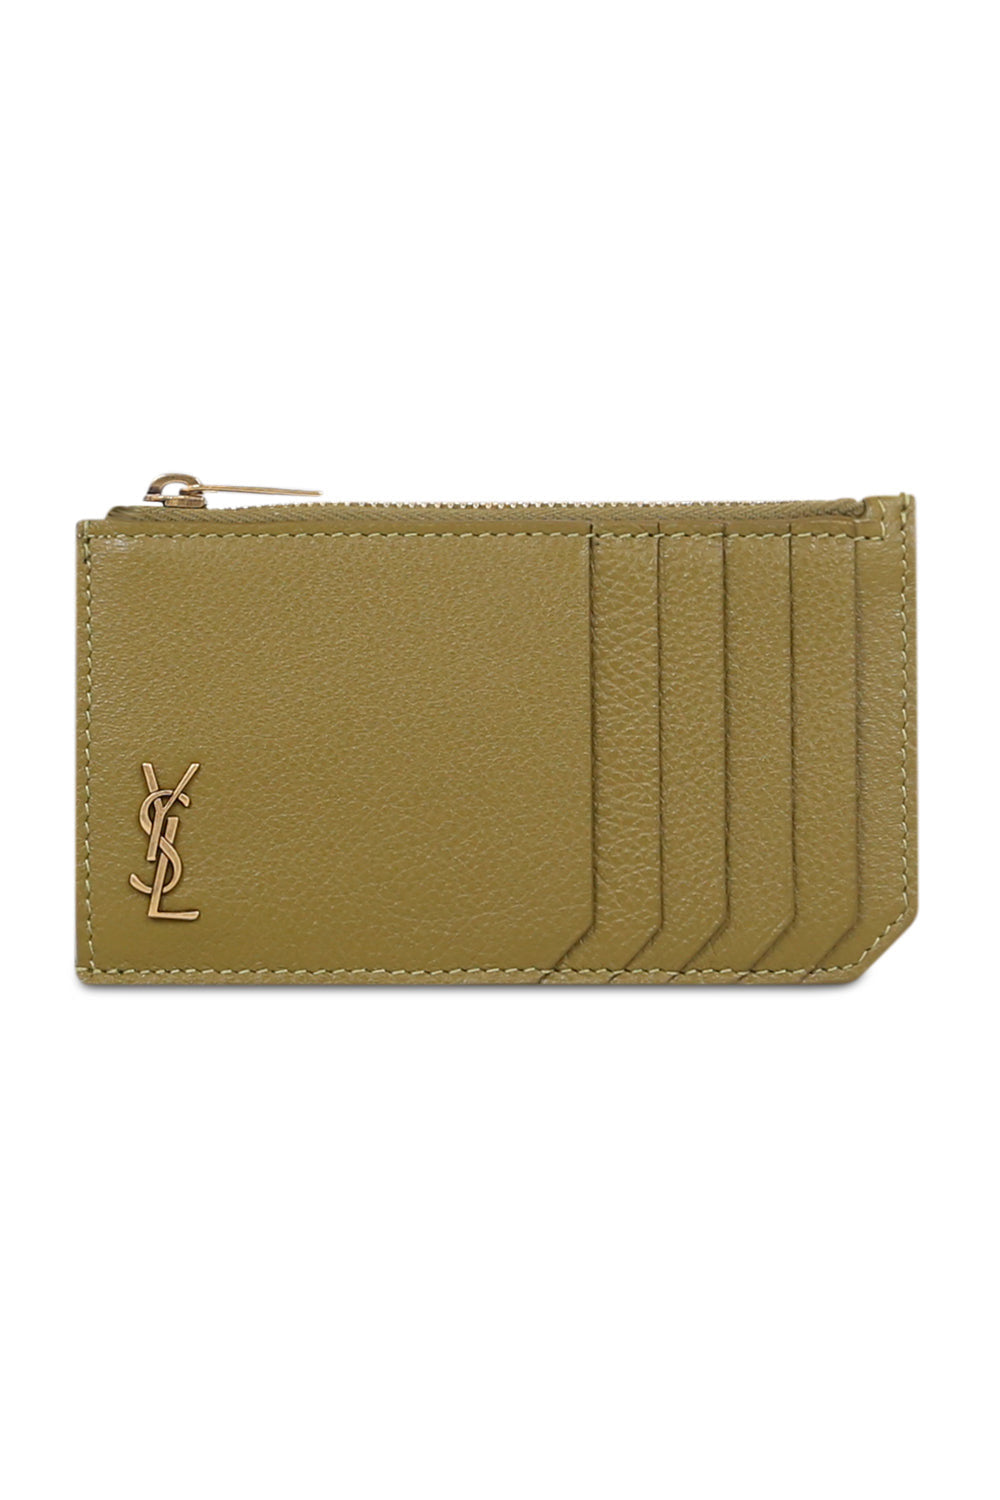 SAINT LAURENT SMALL LEATHER GOODS GREEN ZIPPED CARDHOLDER OLIVE/GOLD